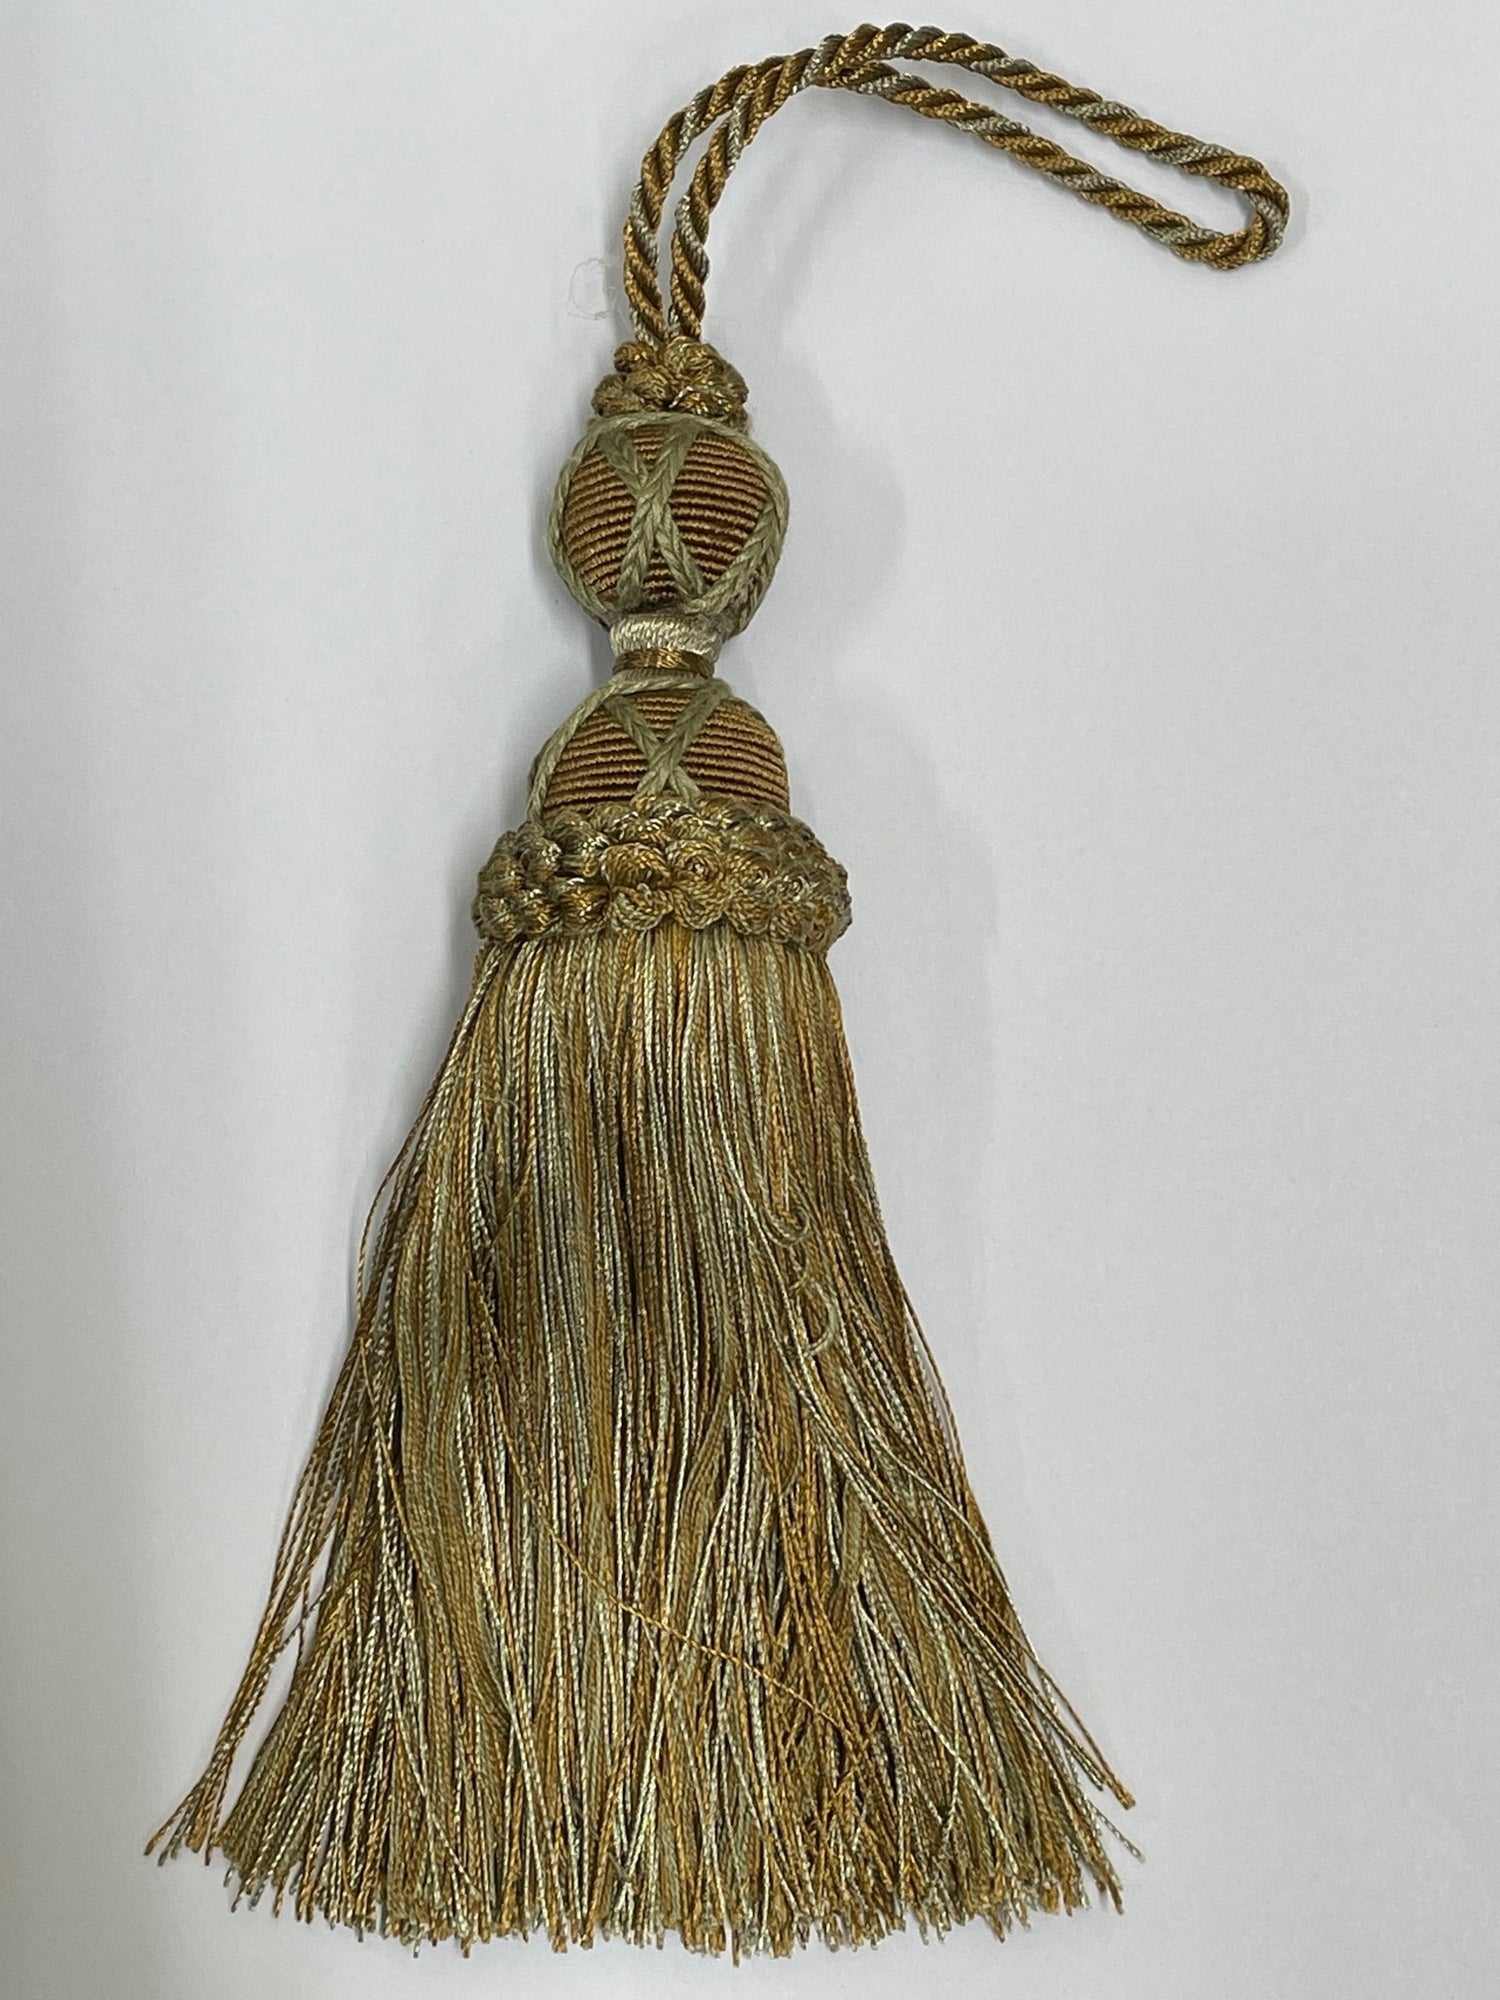 The Lyon - Moss Pati - 5 Inches Key Tassel, 6 Inches Cord